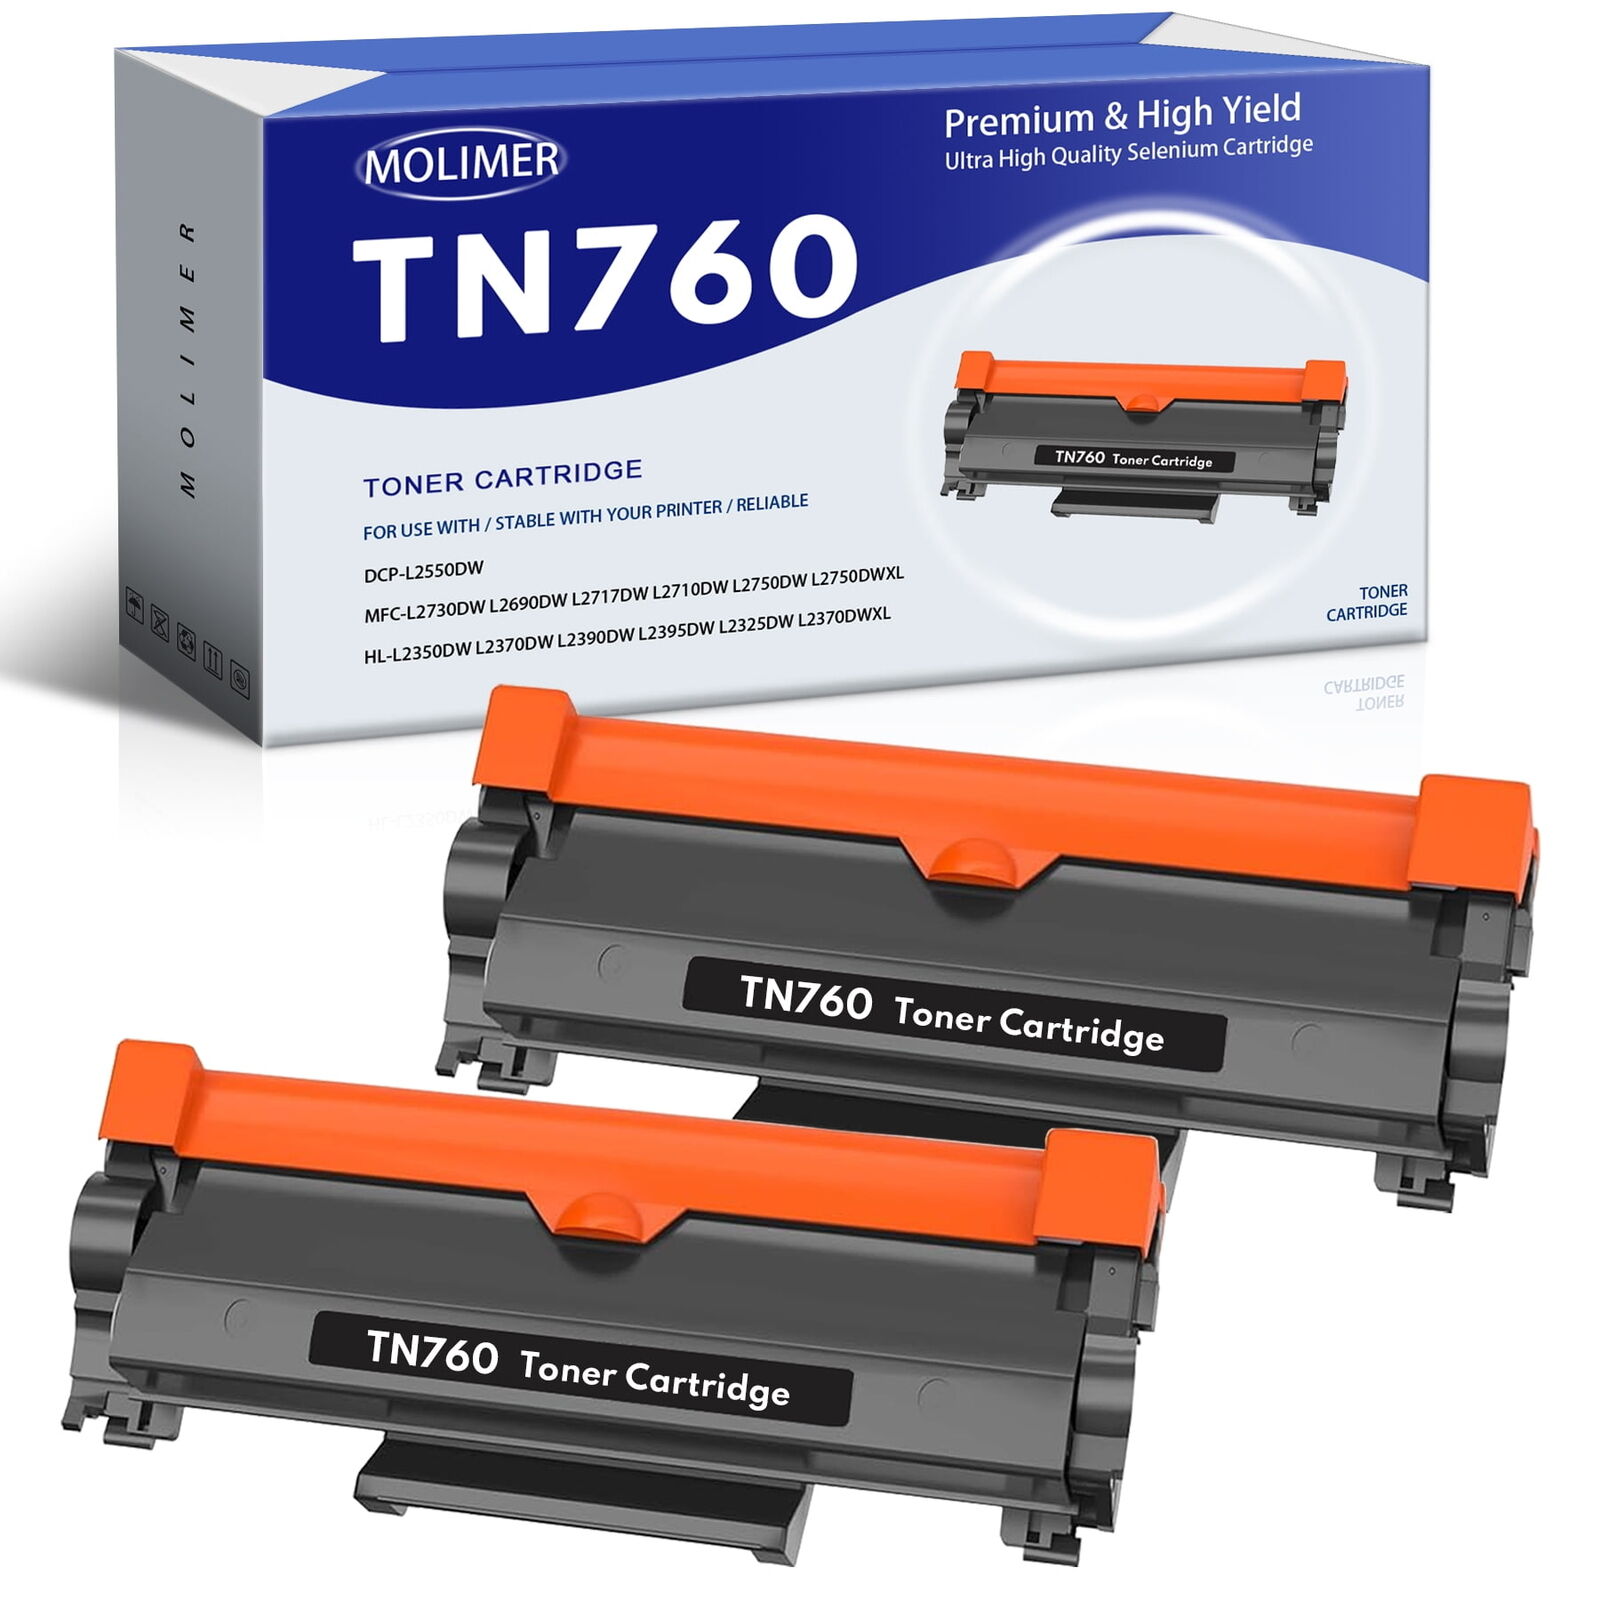 2 BLACK TN760 Toner Cartridge Replacement for Brother DCP-L2550DW MFC-L2710DW